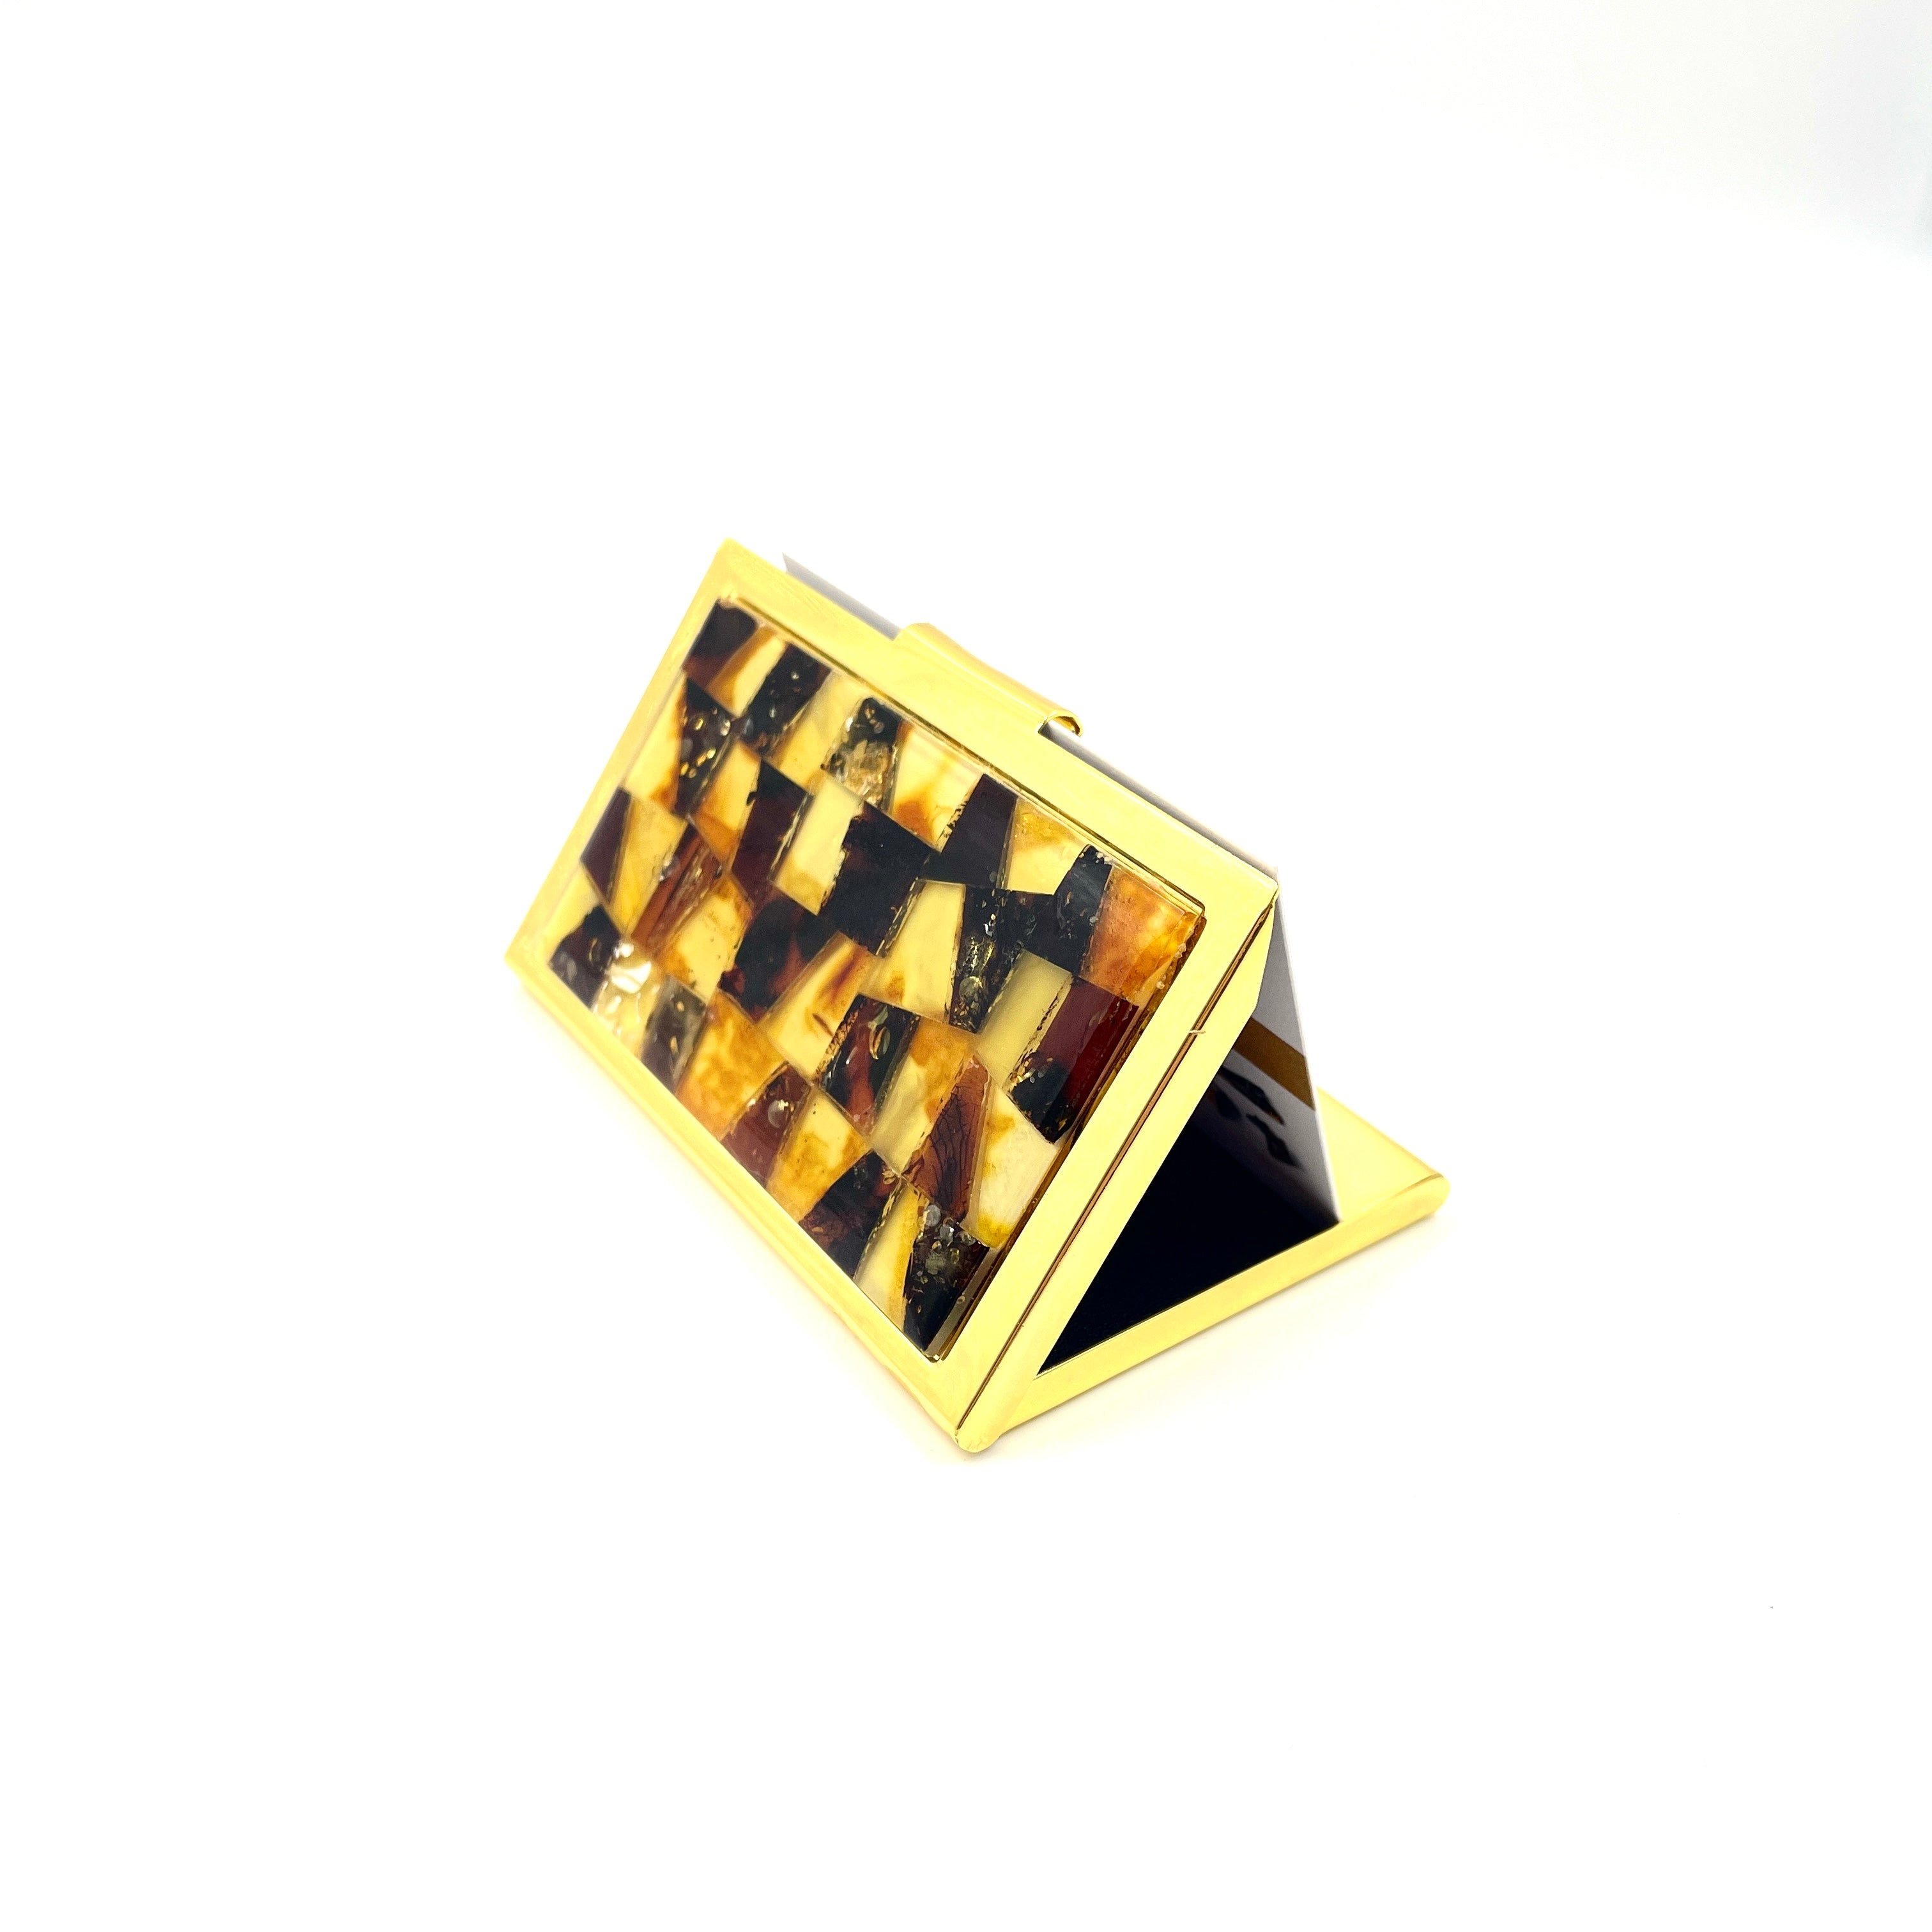 Business card holder decorated with amber mosaic